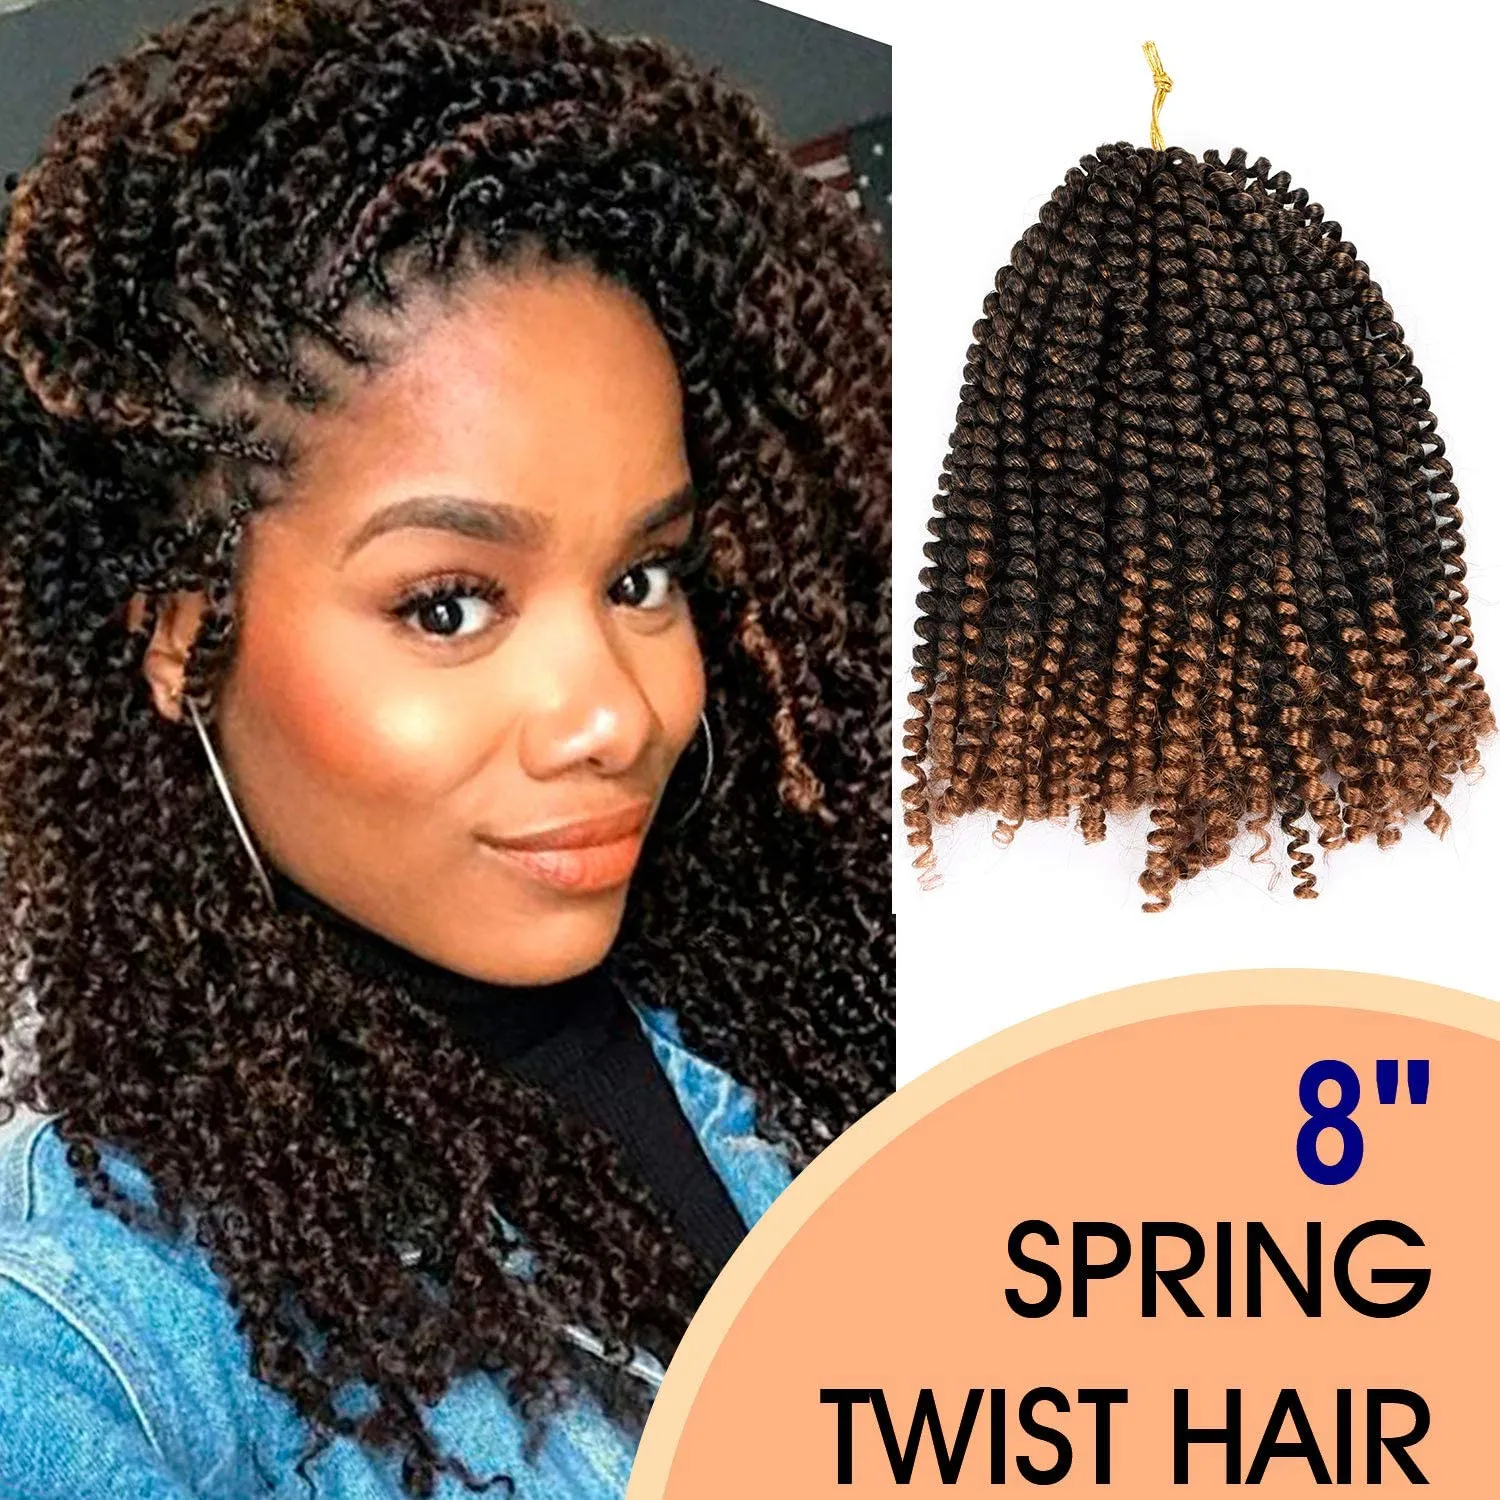 Wholesale Ghana Spring Twist Hair Expression 8 Inch Red Short Ombre Synthetic Crochet Braids